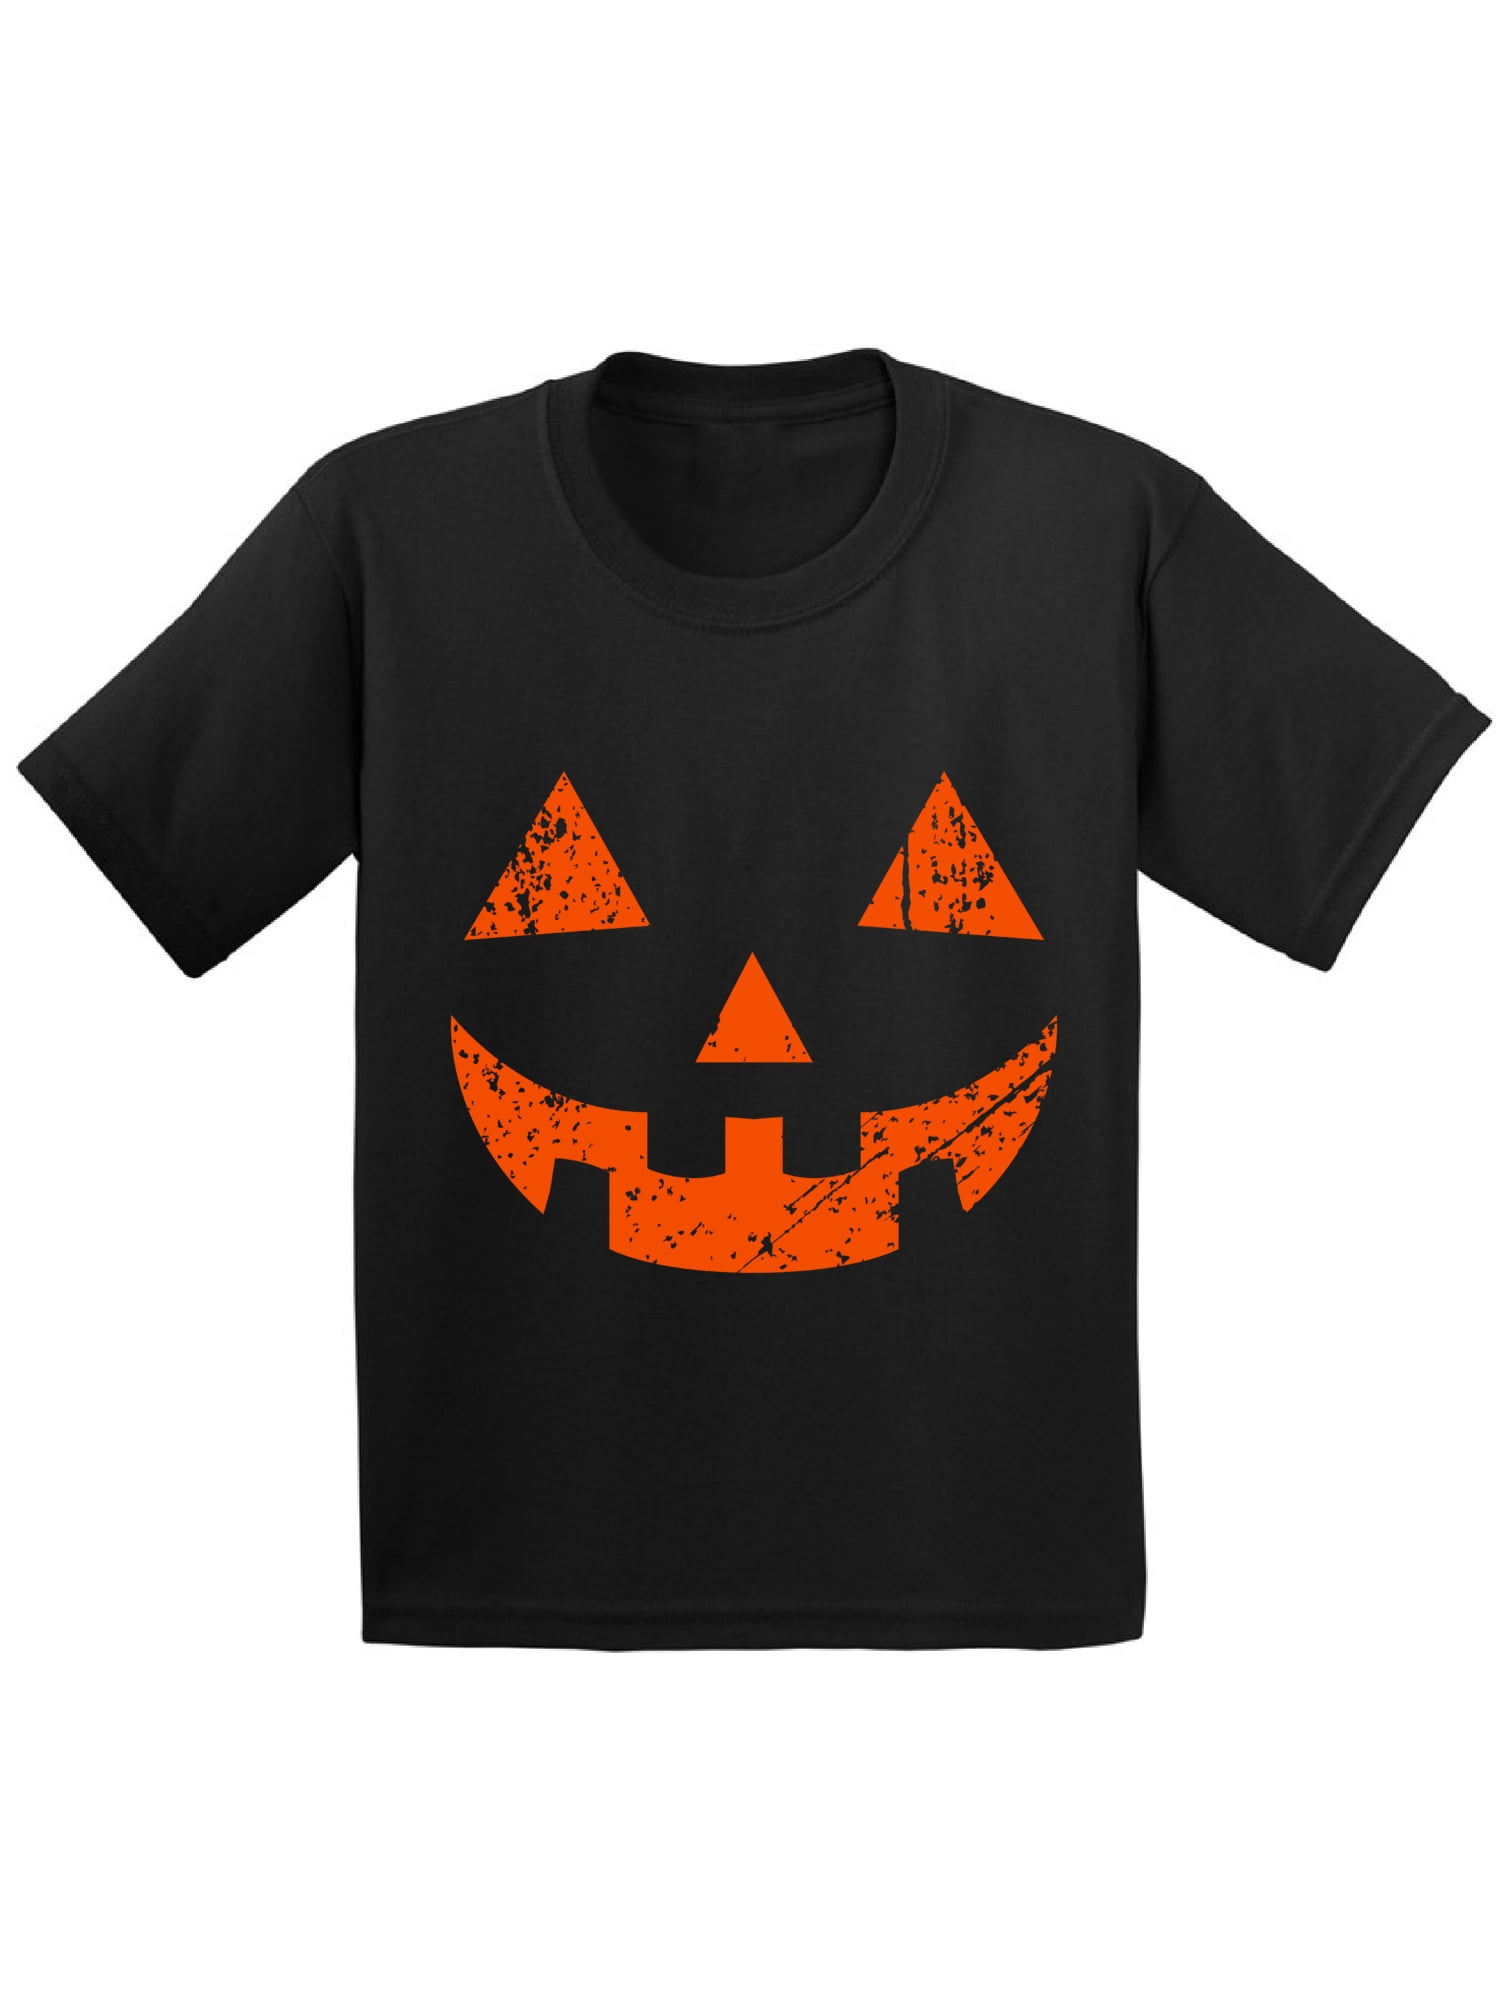 Brother Family Matching Halloween Tshirts. Baby Mom Dad Trick or Treat Halloween Pumpkin Face Shirt Sister Halloween Matching Outfits Cute Jack O Lantern Matching Halloween Shirts for Family 